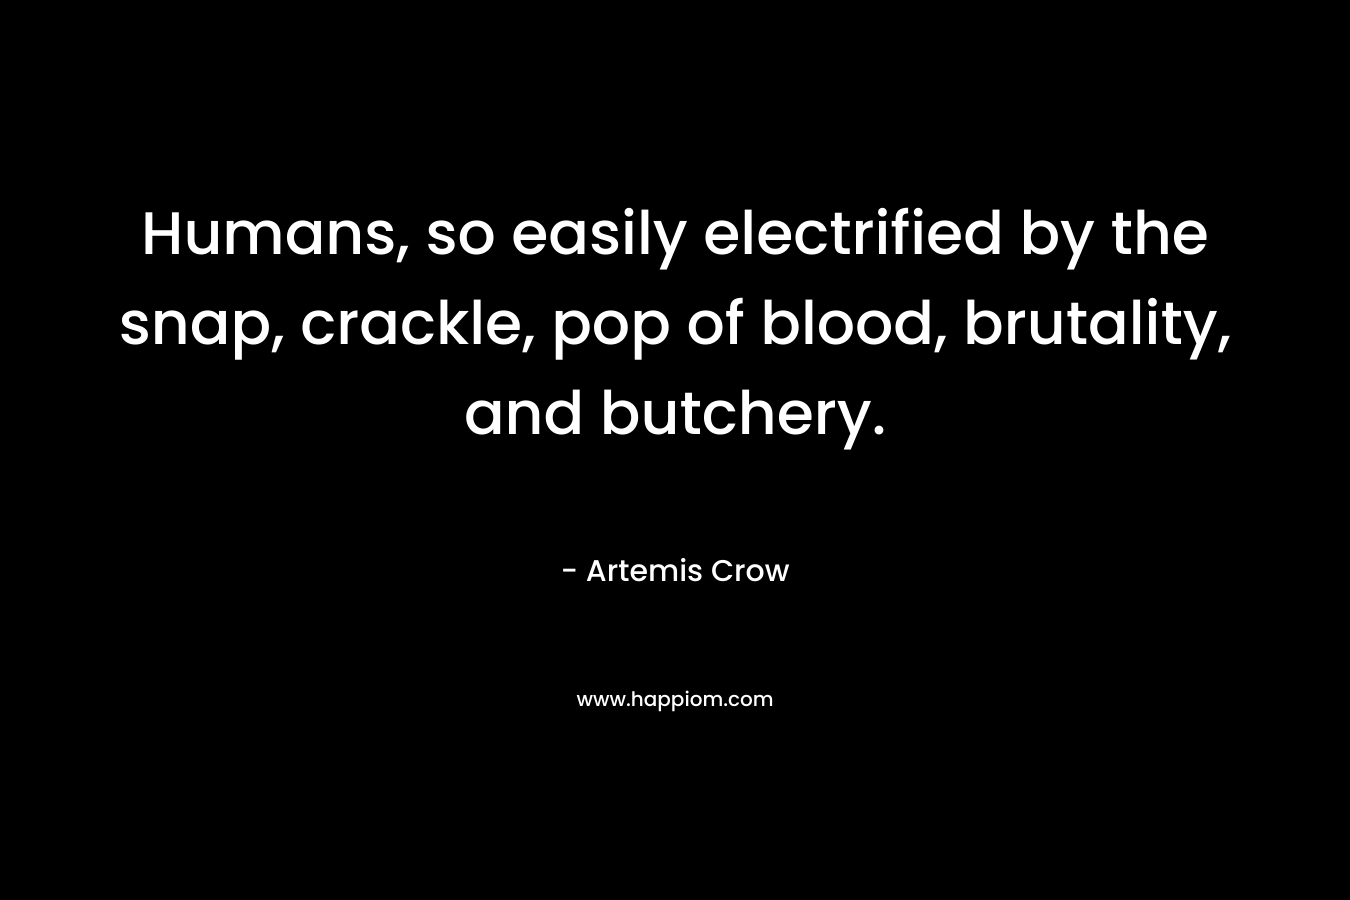 Humans, so easily electrified by the snap, crackle, pop of blood, brutality, and butchery.